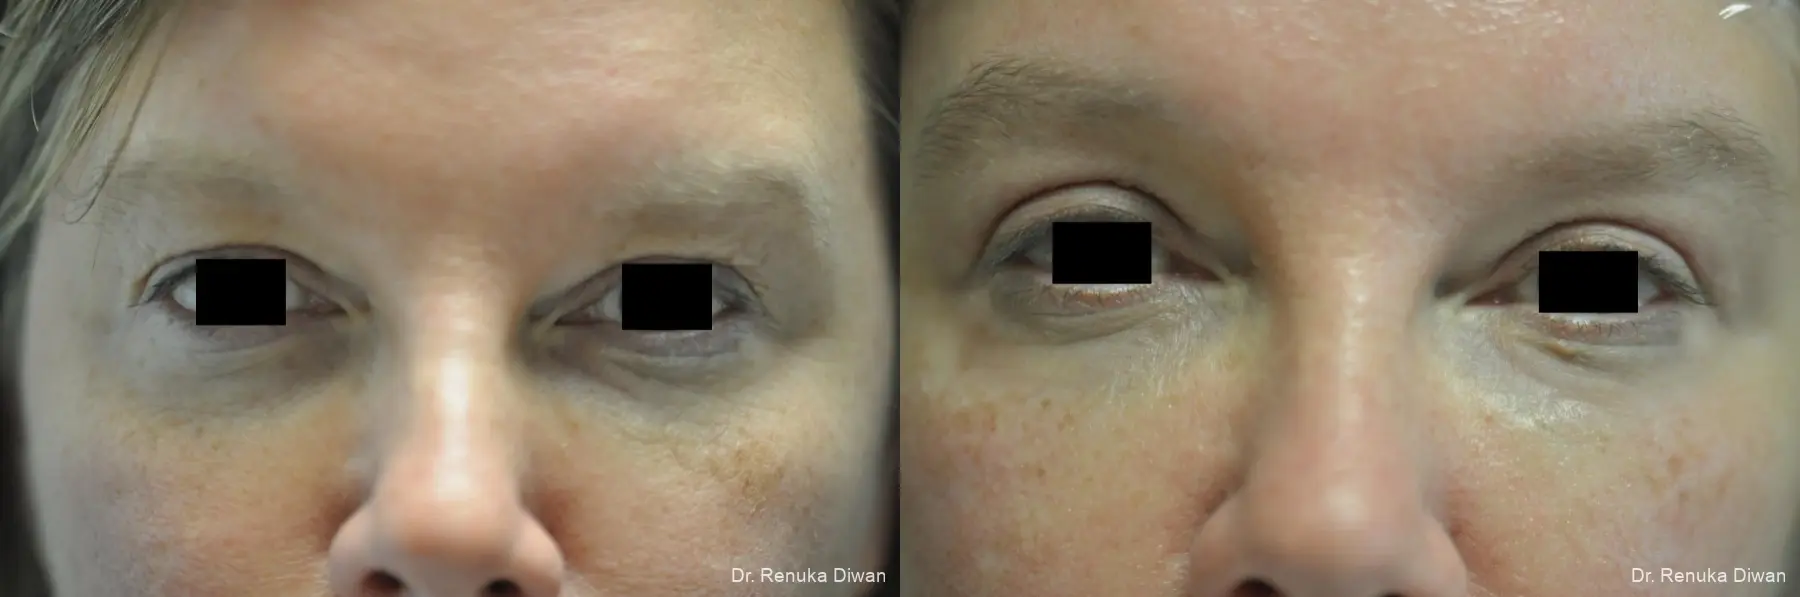 Blepharoplasty: Patient 2 - Before and After 5